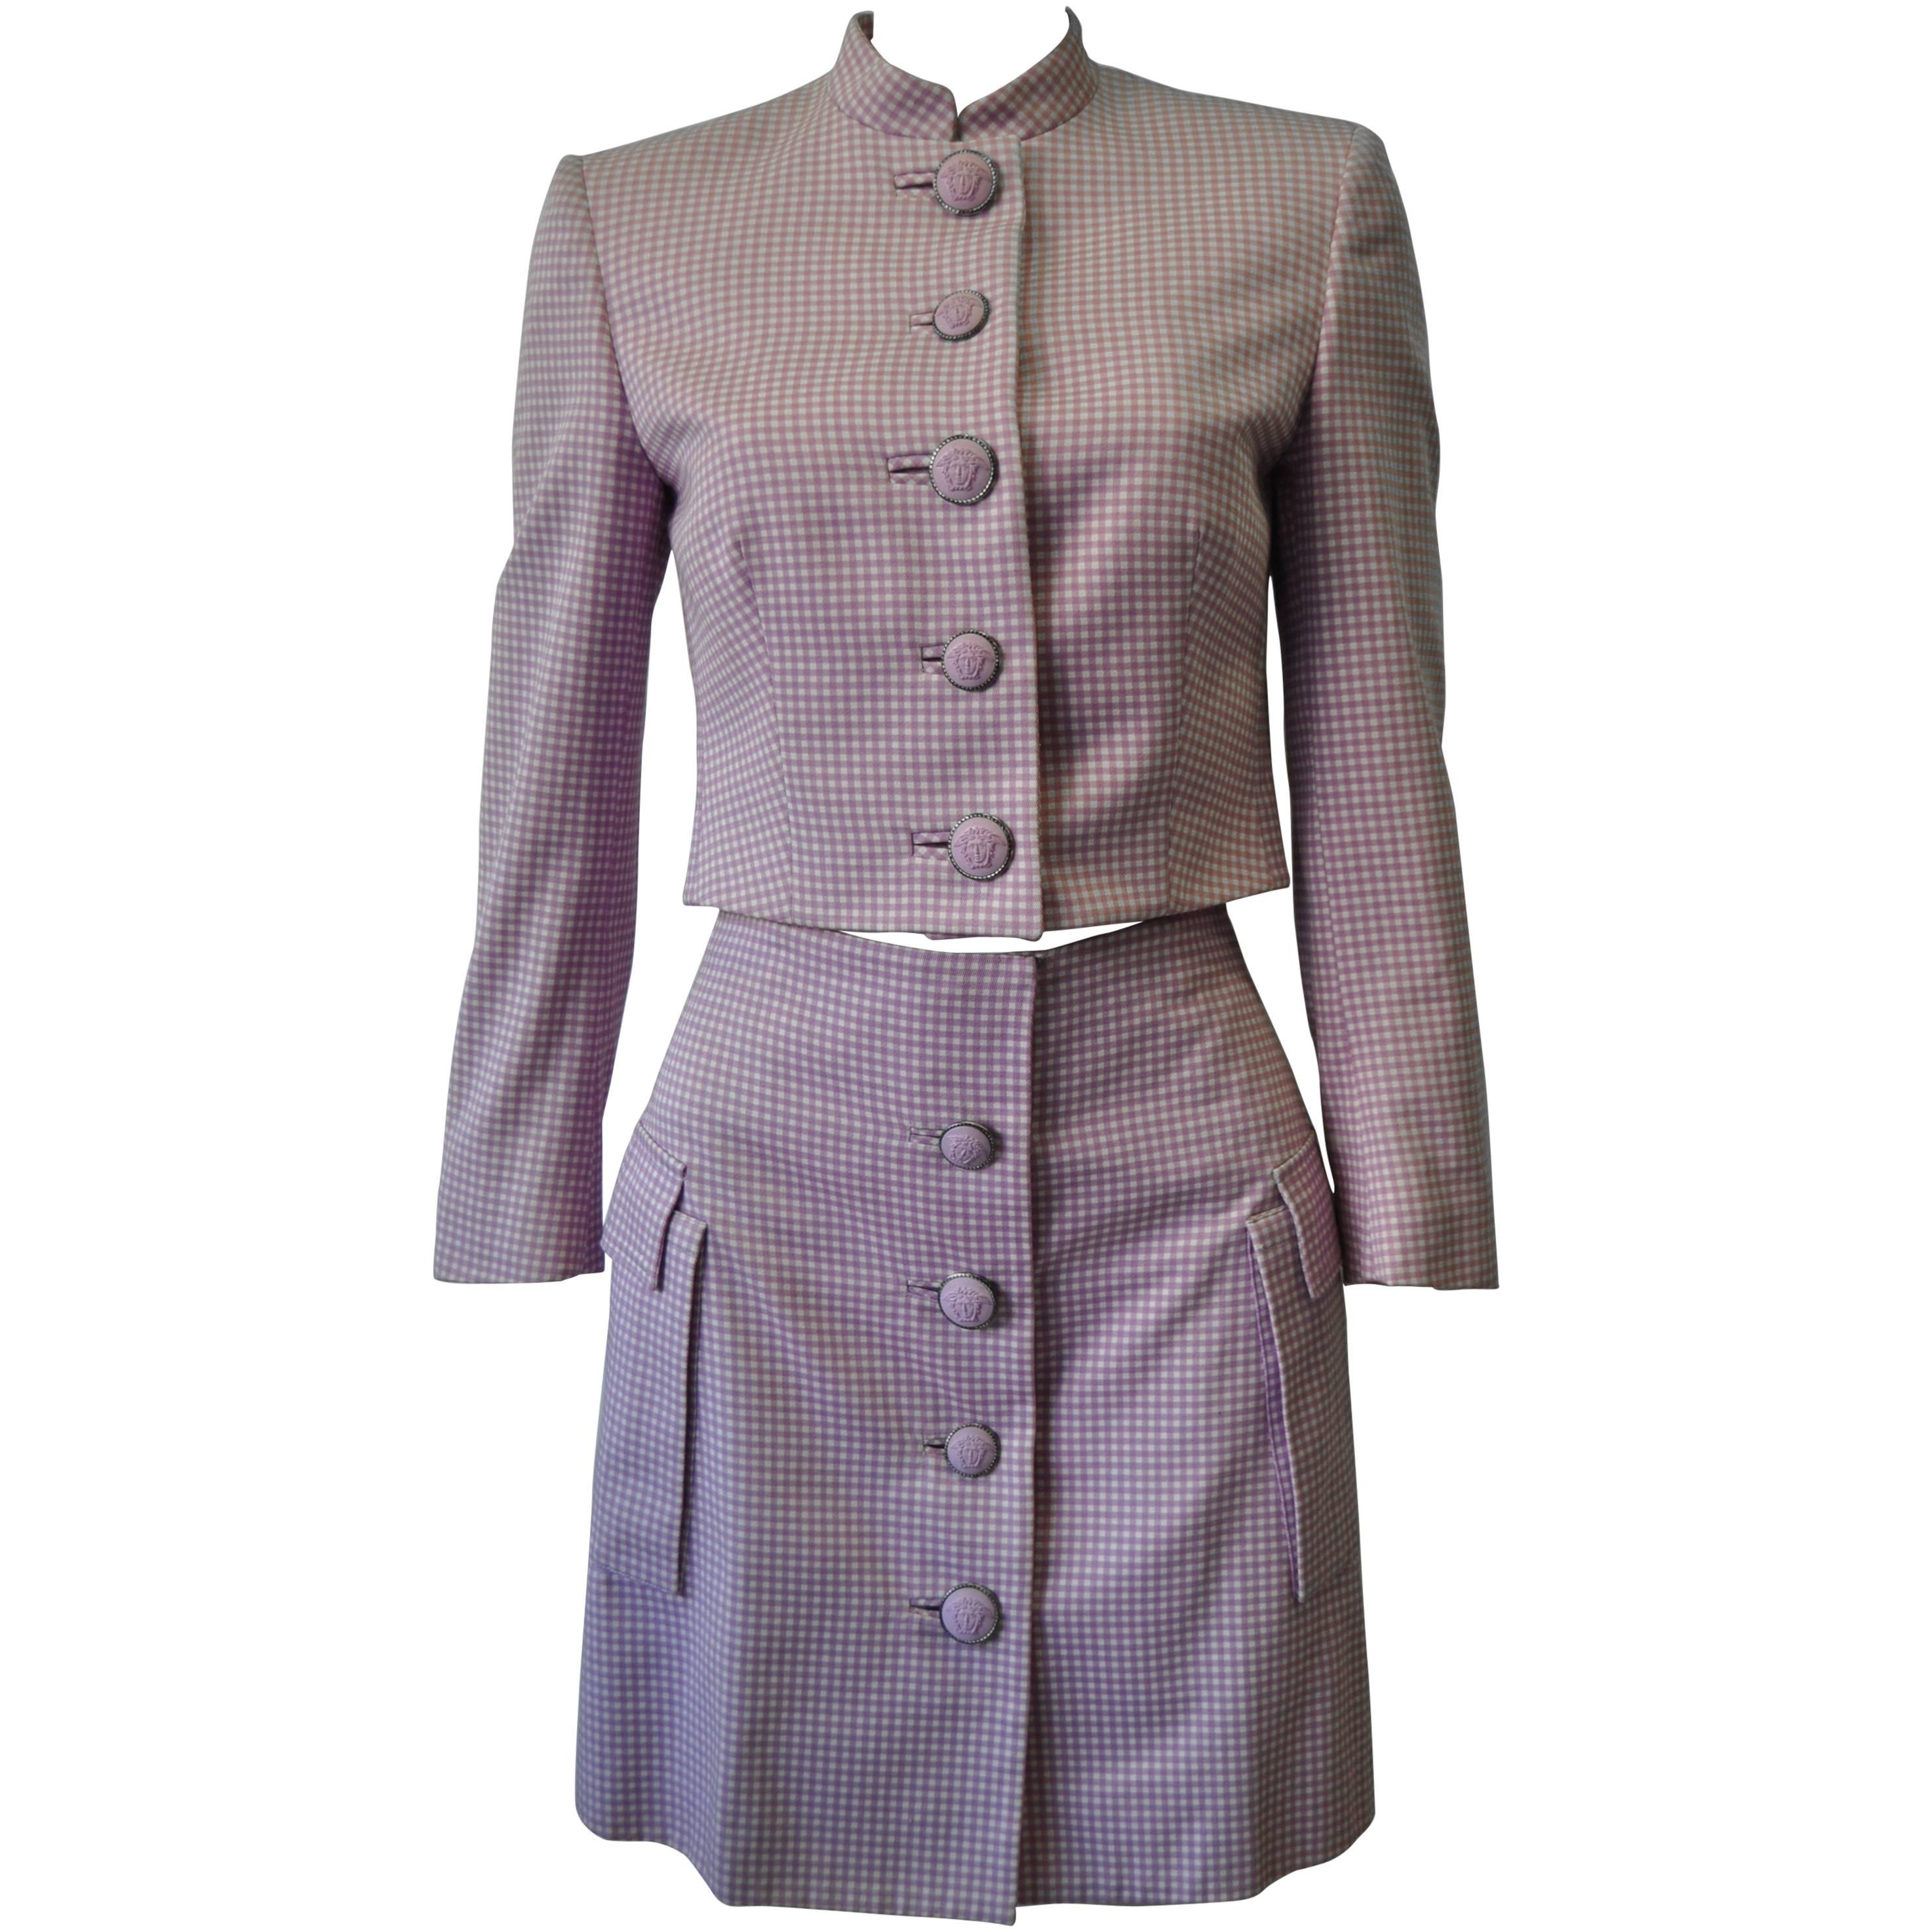 Exceptional Gianni Versace Couture Check Skirt Suit featuring Medusa Buttons For Sale